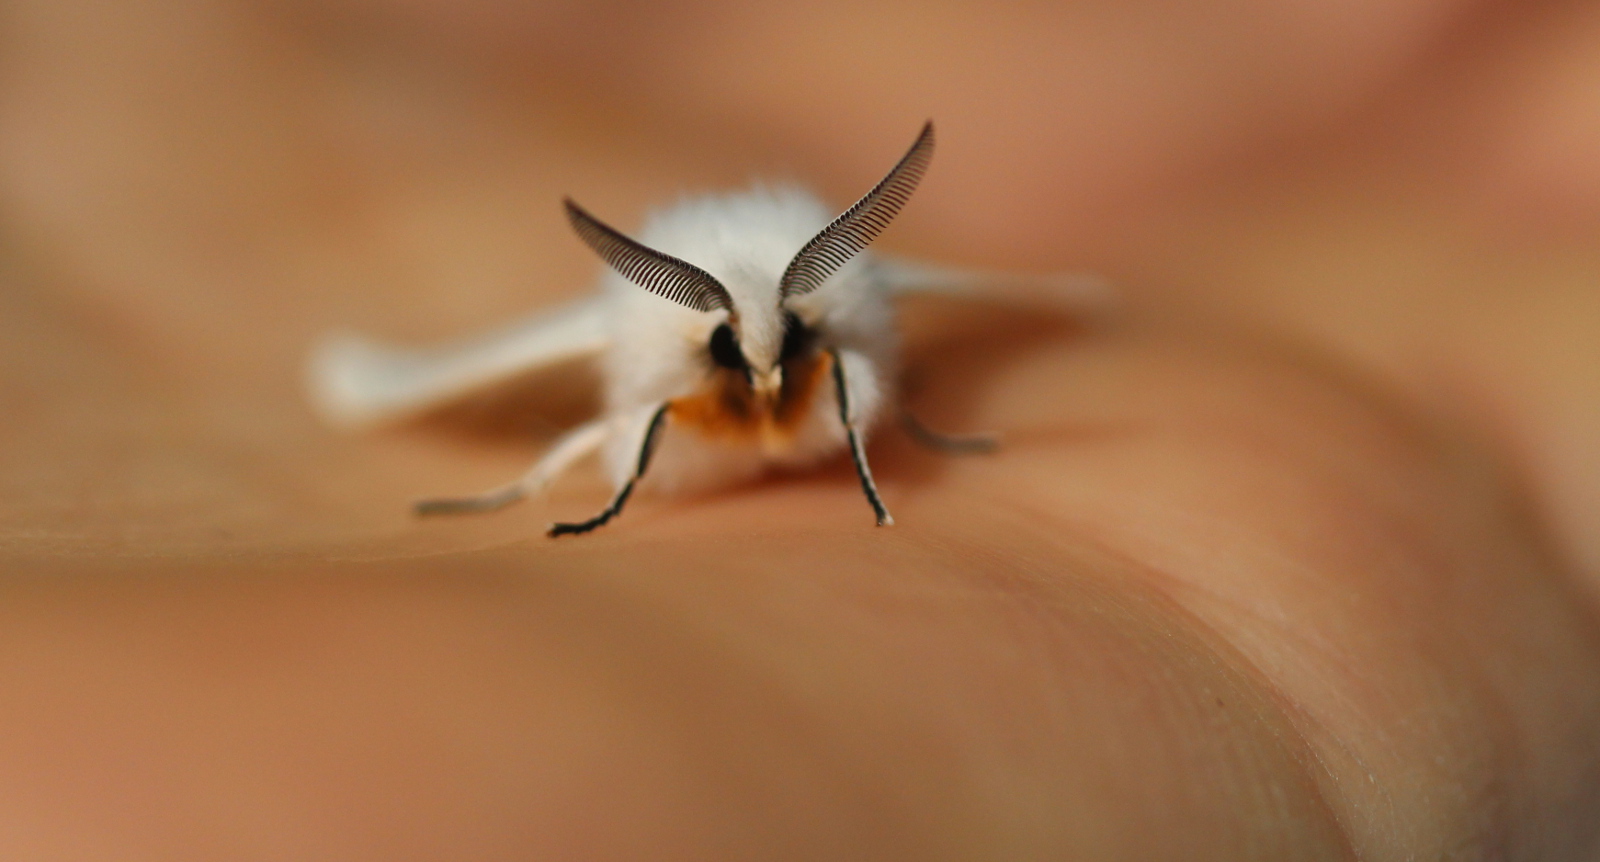 Agreeable Tiger Moth - front view in palm of hand